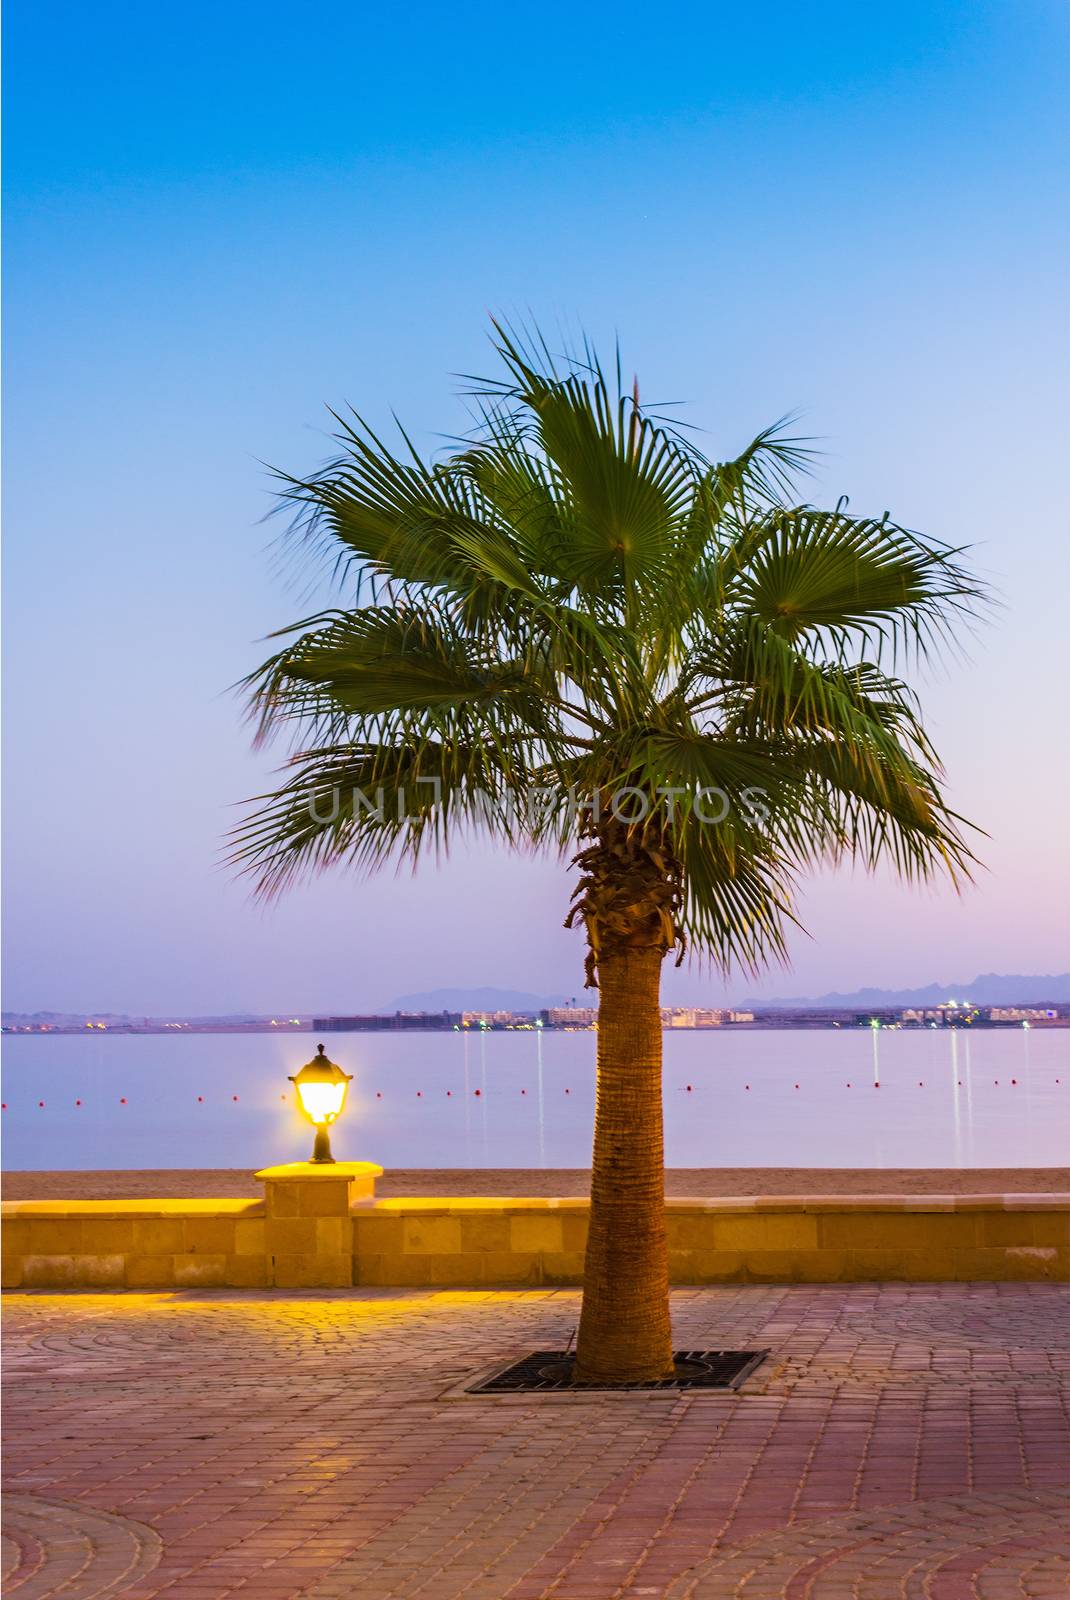 Promenade with palm trees on the shore of the Red Sea, Egypt, Hurghada